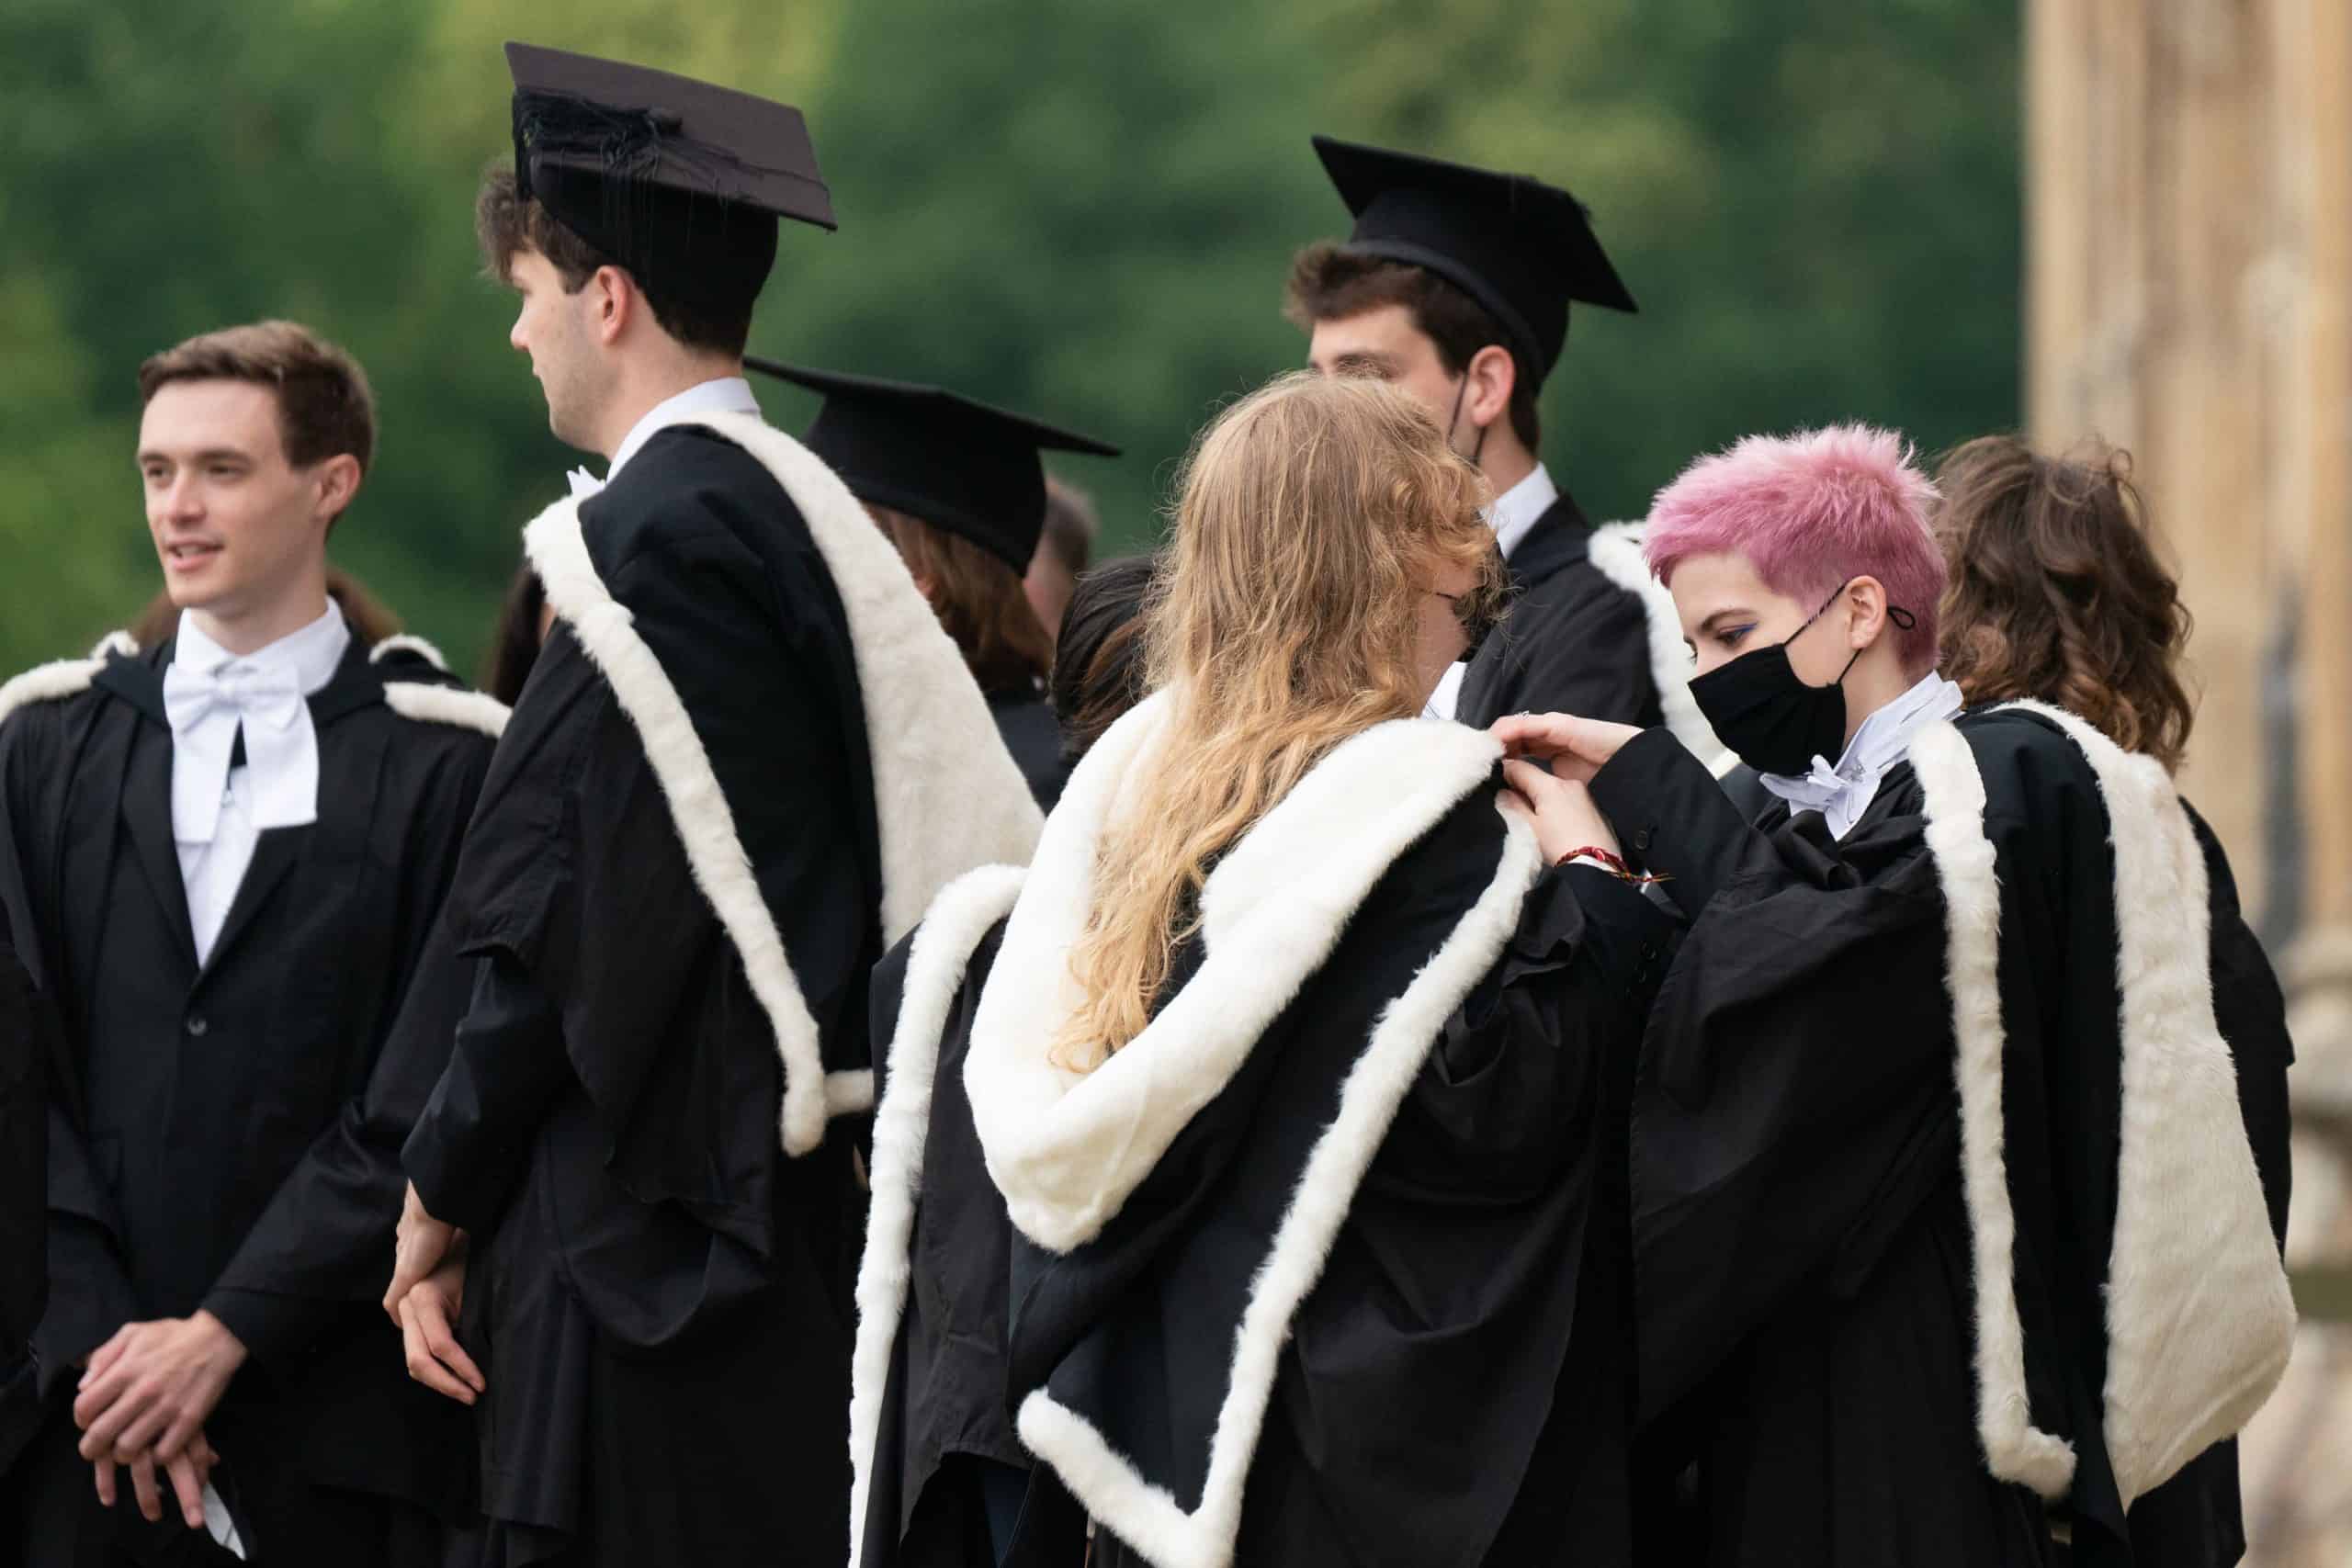 The Treasury wants to cut tuition fees to save billions in unpaid debt